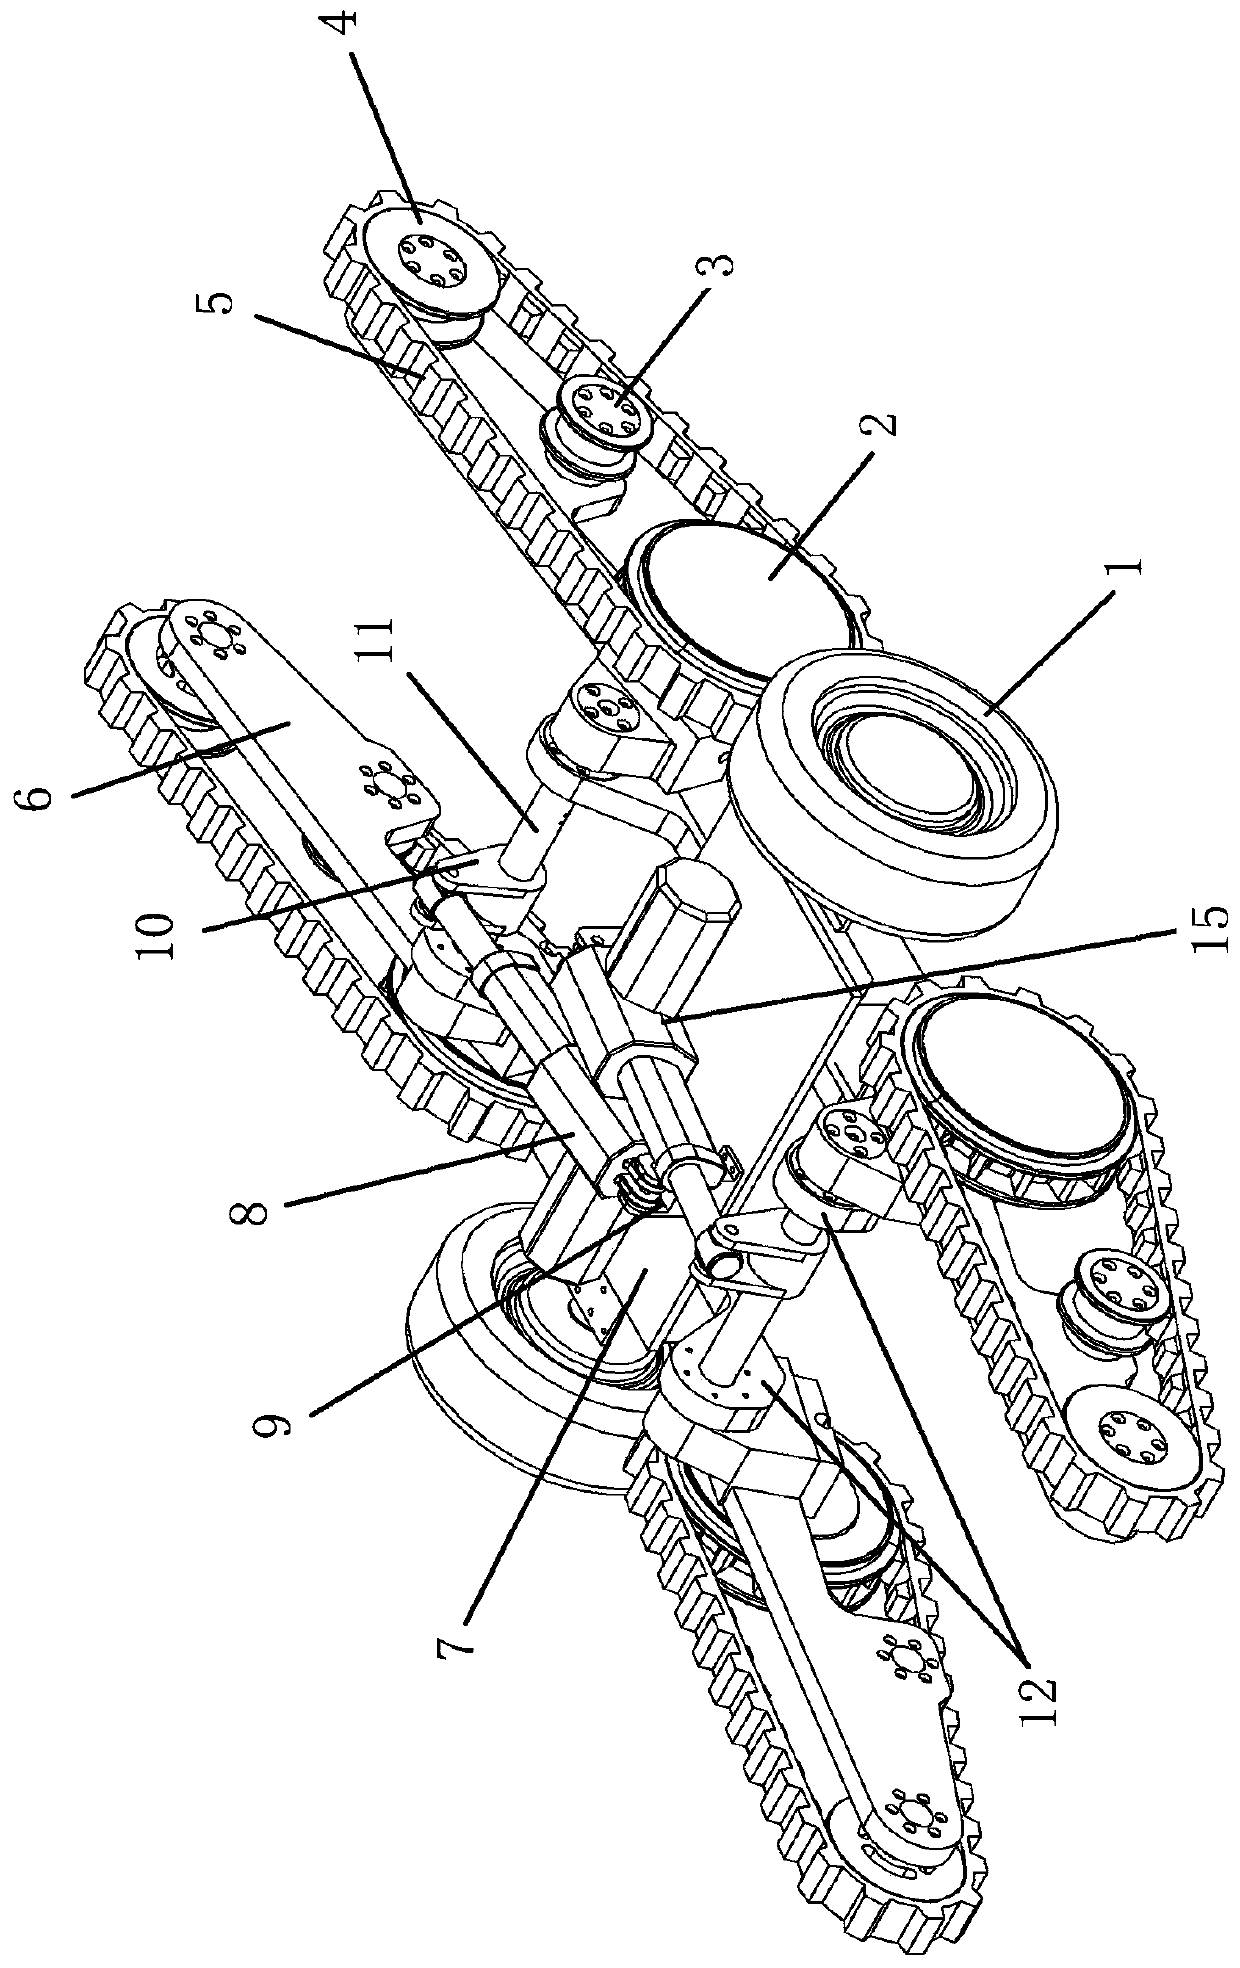 A two-wheel-leg-track compound mobile mechanism